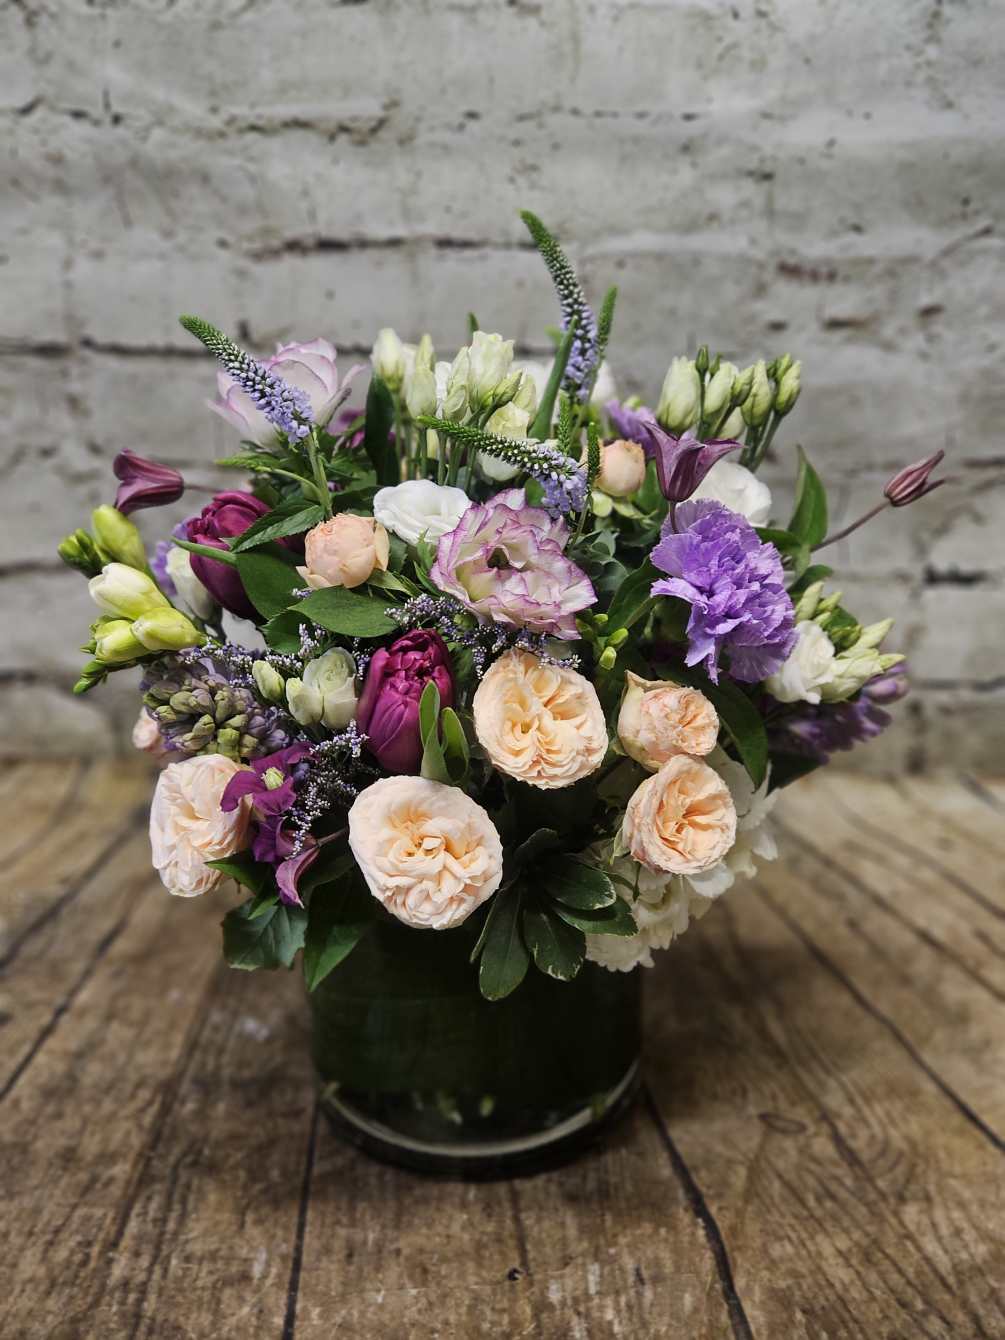 A dense composition of fragrant spring flowers such as hyacinth and freesia